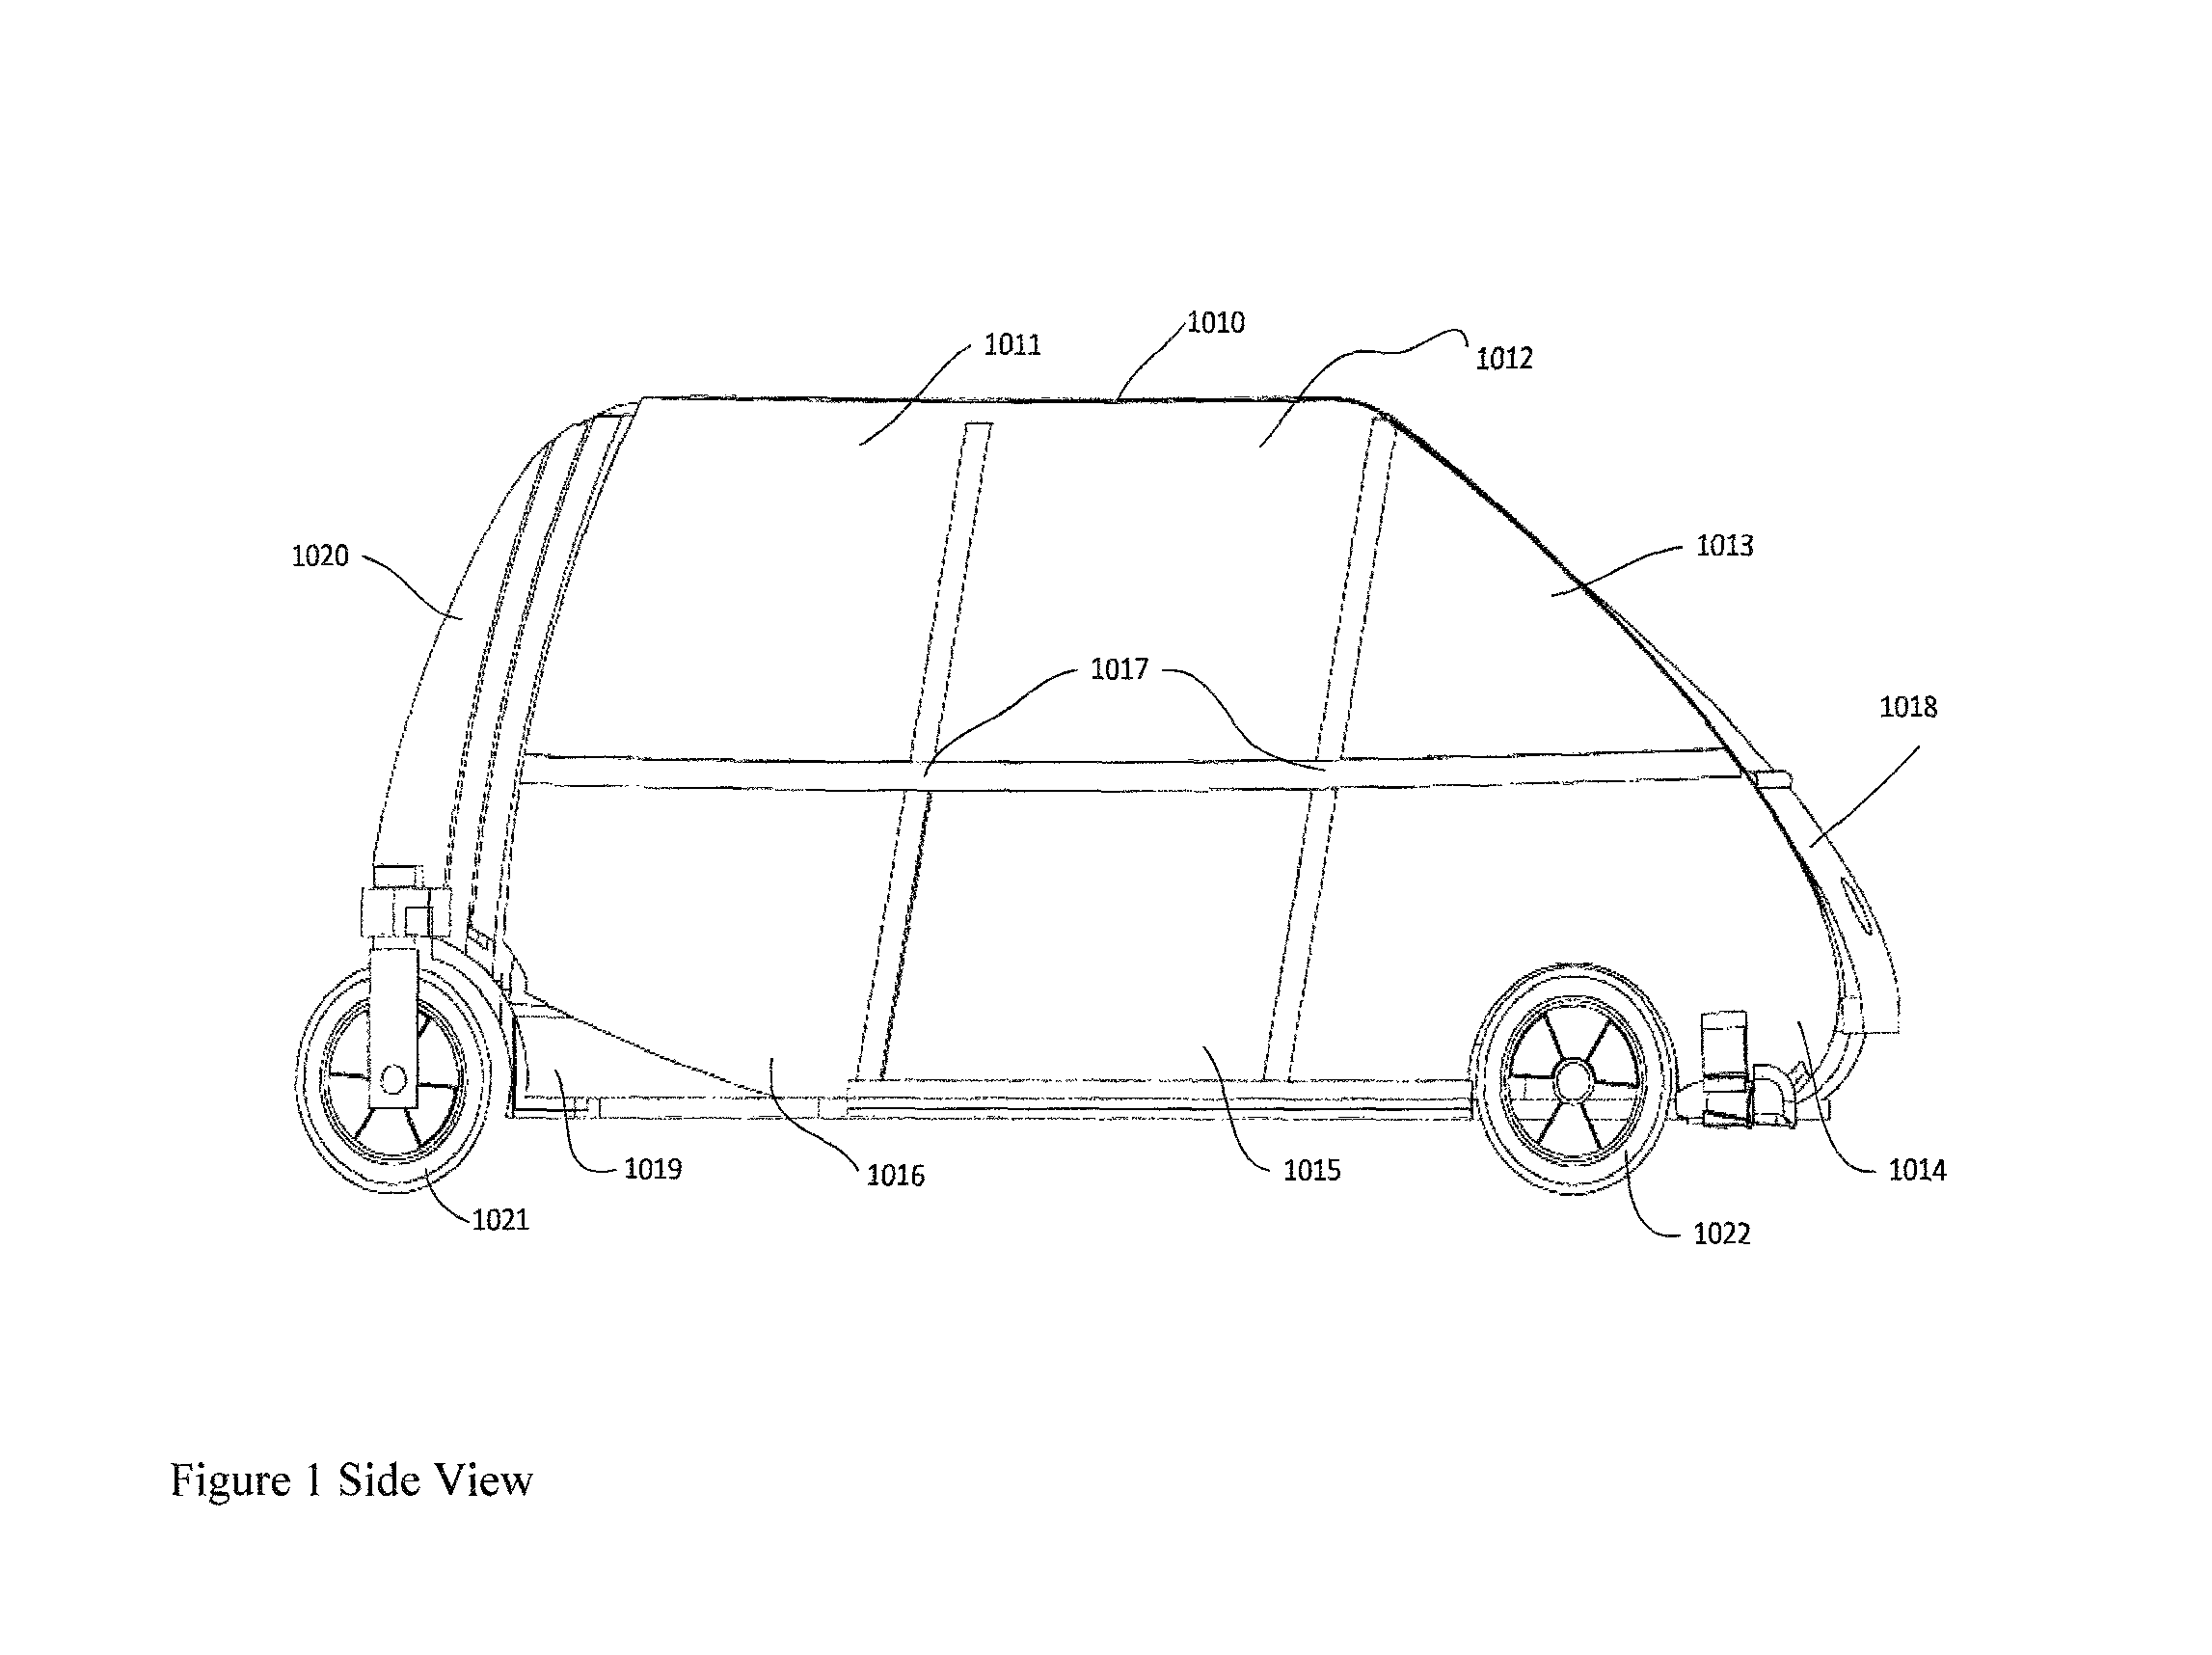 Solar electric vehicle with foldable body panels on a sun tracking chassis